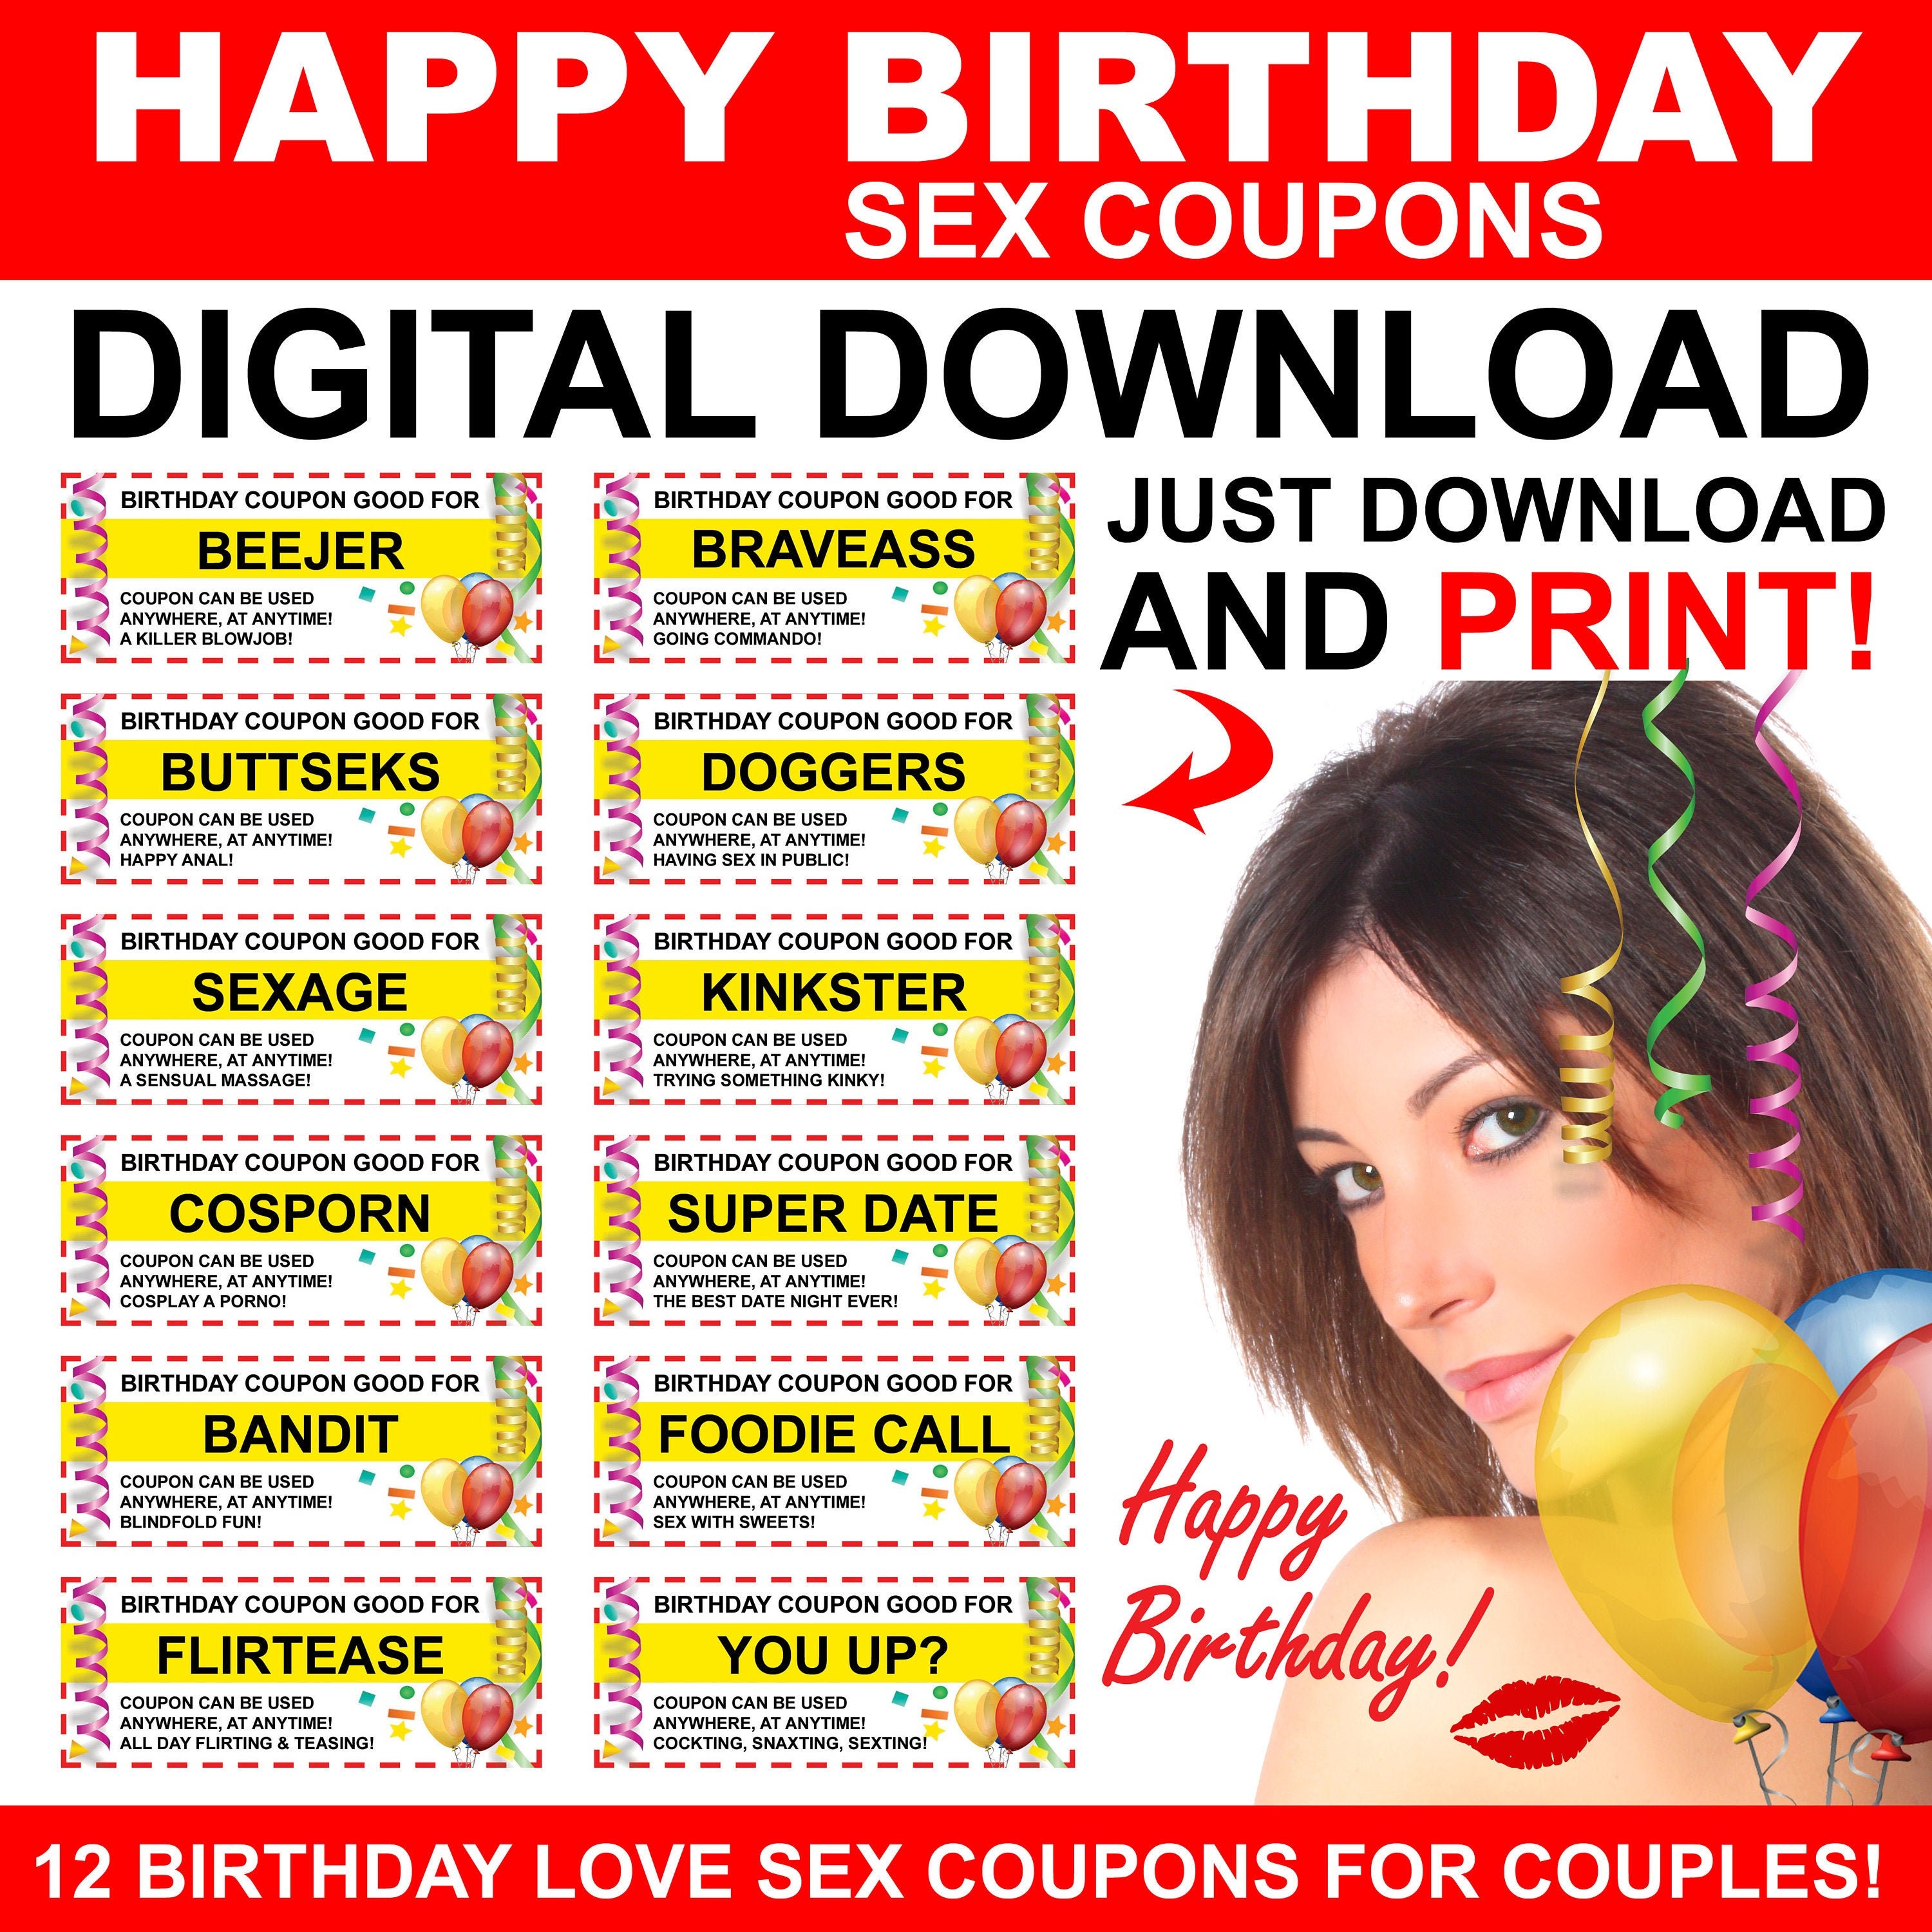 Coupons include: * BEEJER (Blow Job) * BRAVEASS (Commando) * BUTTSEKS (Anal...